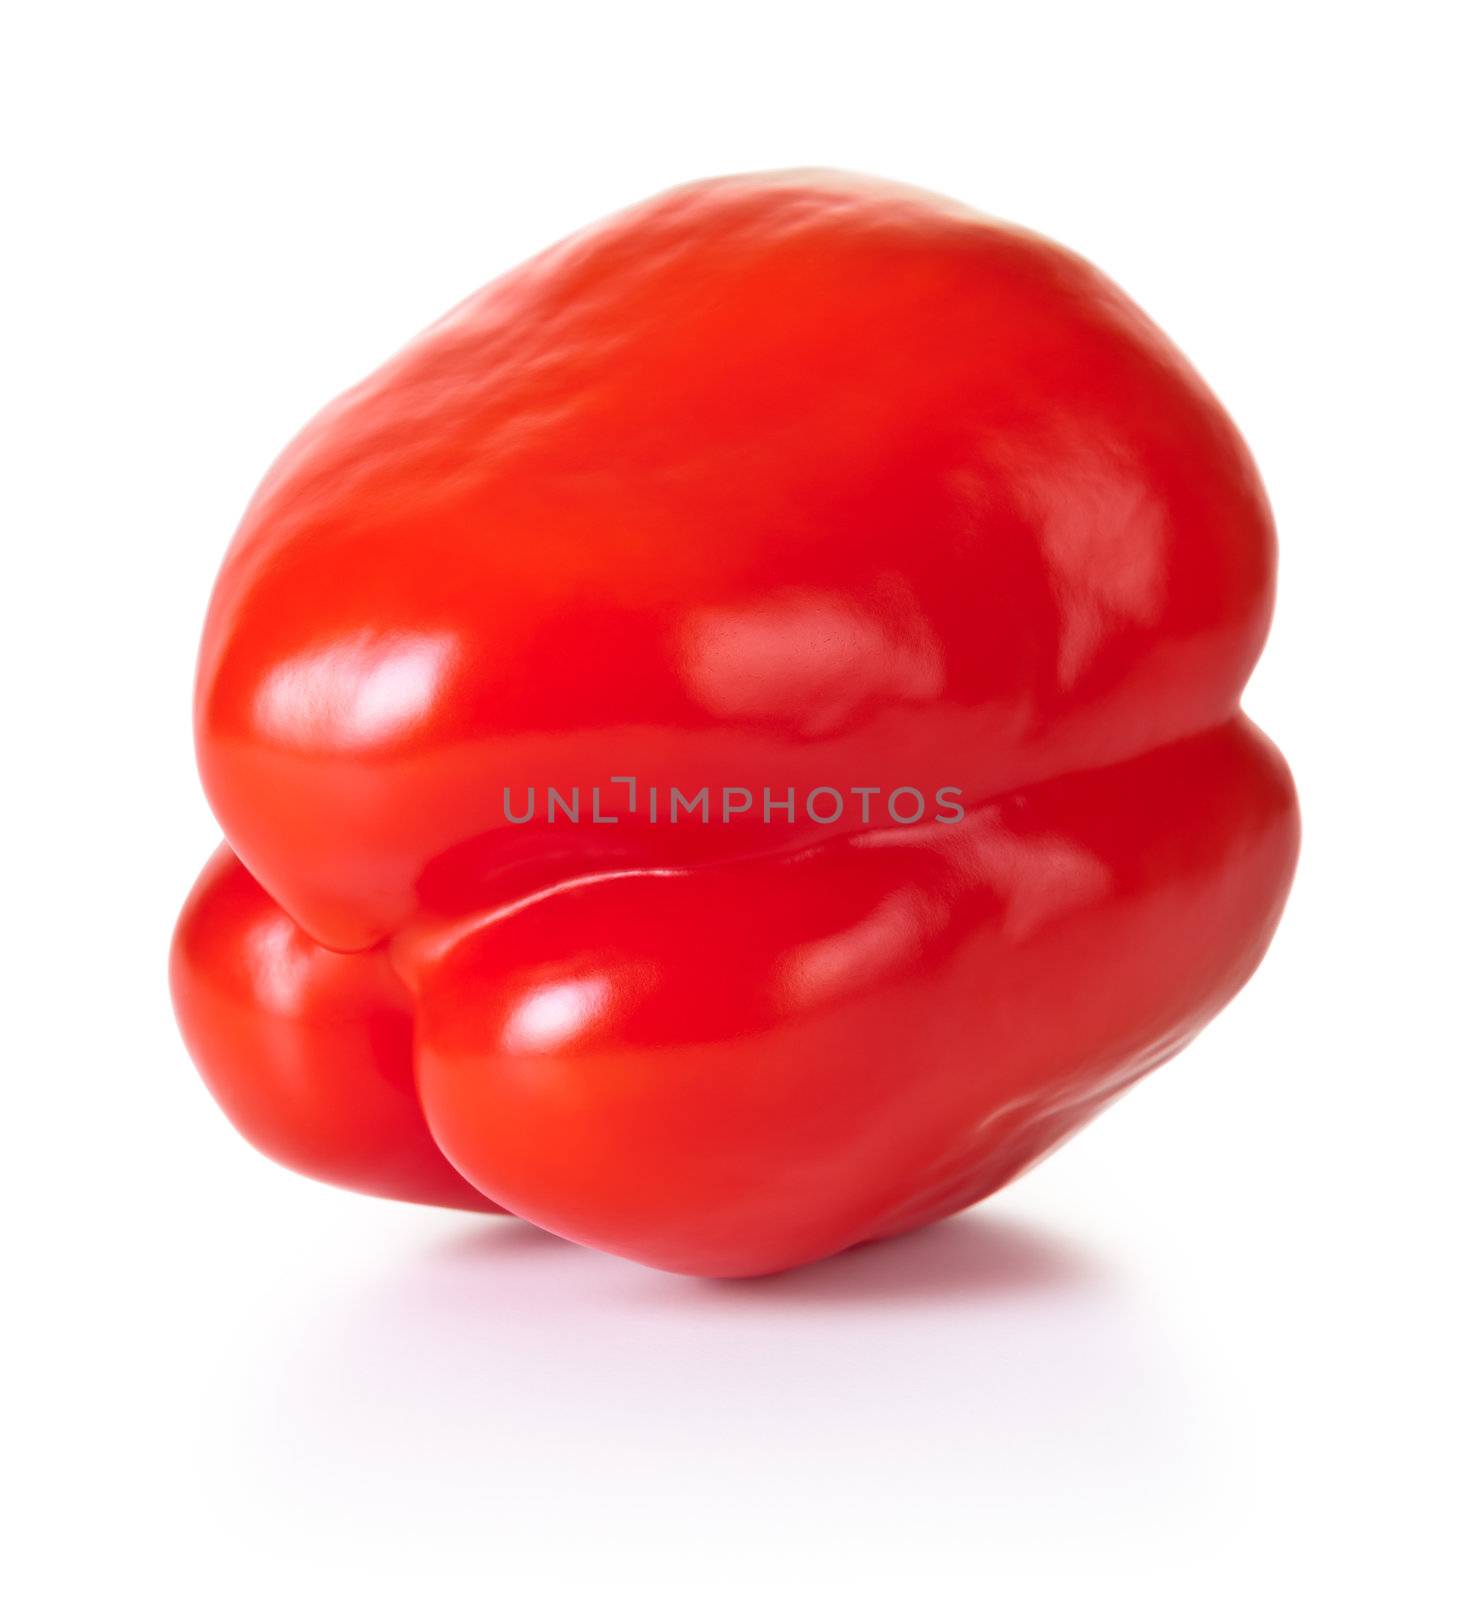 Red pepper isolated on white background, fresh vegetable